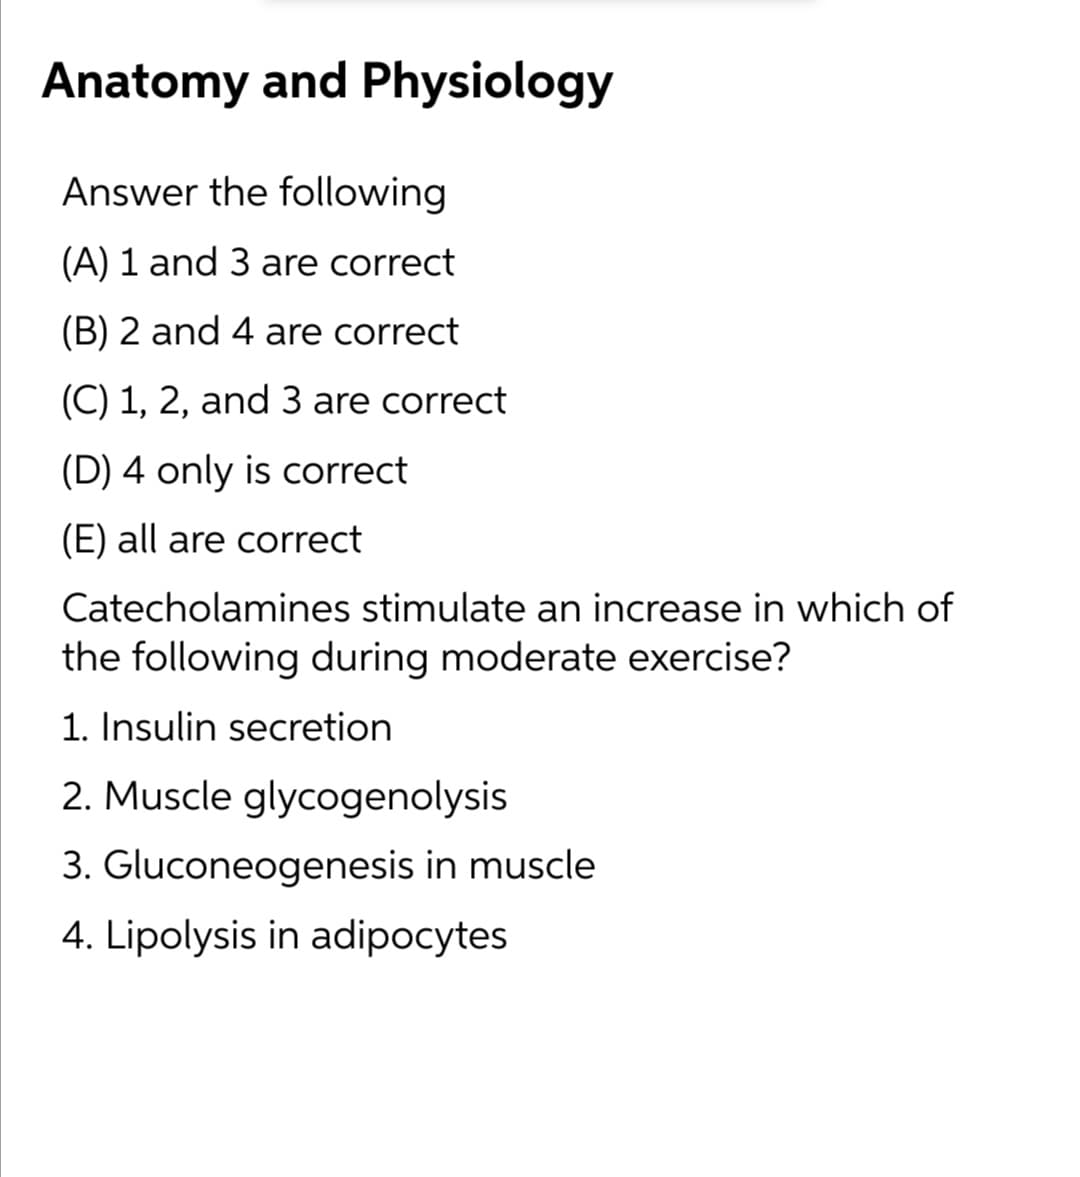 Anatomy and Physiology
Answer the following
(A) 1 and 3 are correct
(B) 2 and 4 are correct
(C) 1, 2, and 3 are correct
(D) 4 only is correct
(E) all are correct
Catecholamines stimulate an increase in which of
the following during moderate exercise?
1. Insulin secretion
2. Muscle glycogenolysis
3. Gluconeogenesis in muscle
4. Lipolysis in adipocytes
